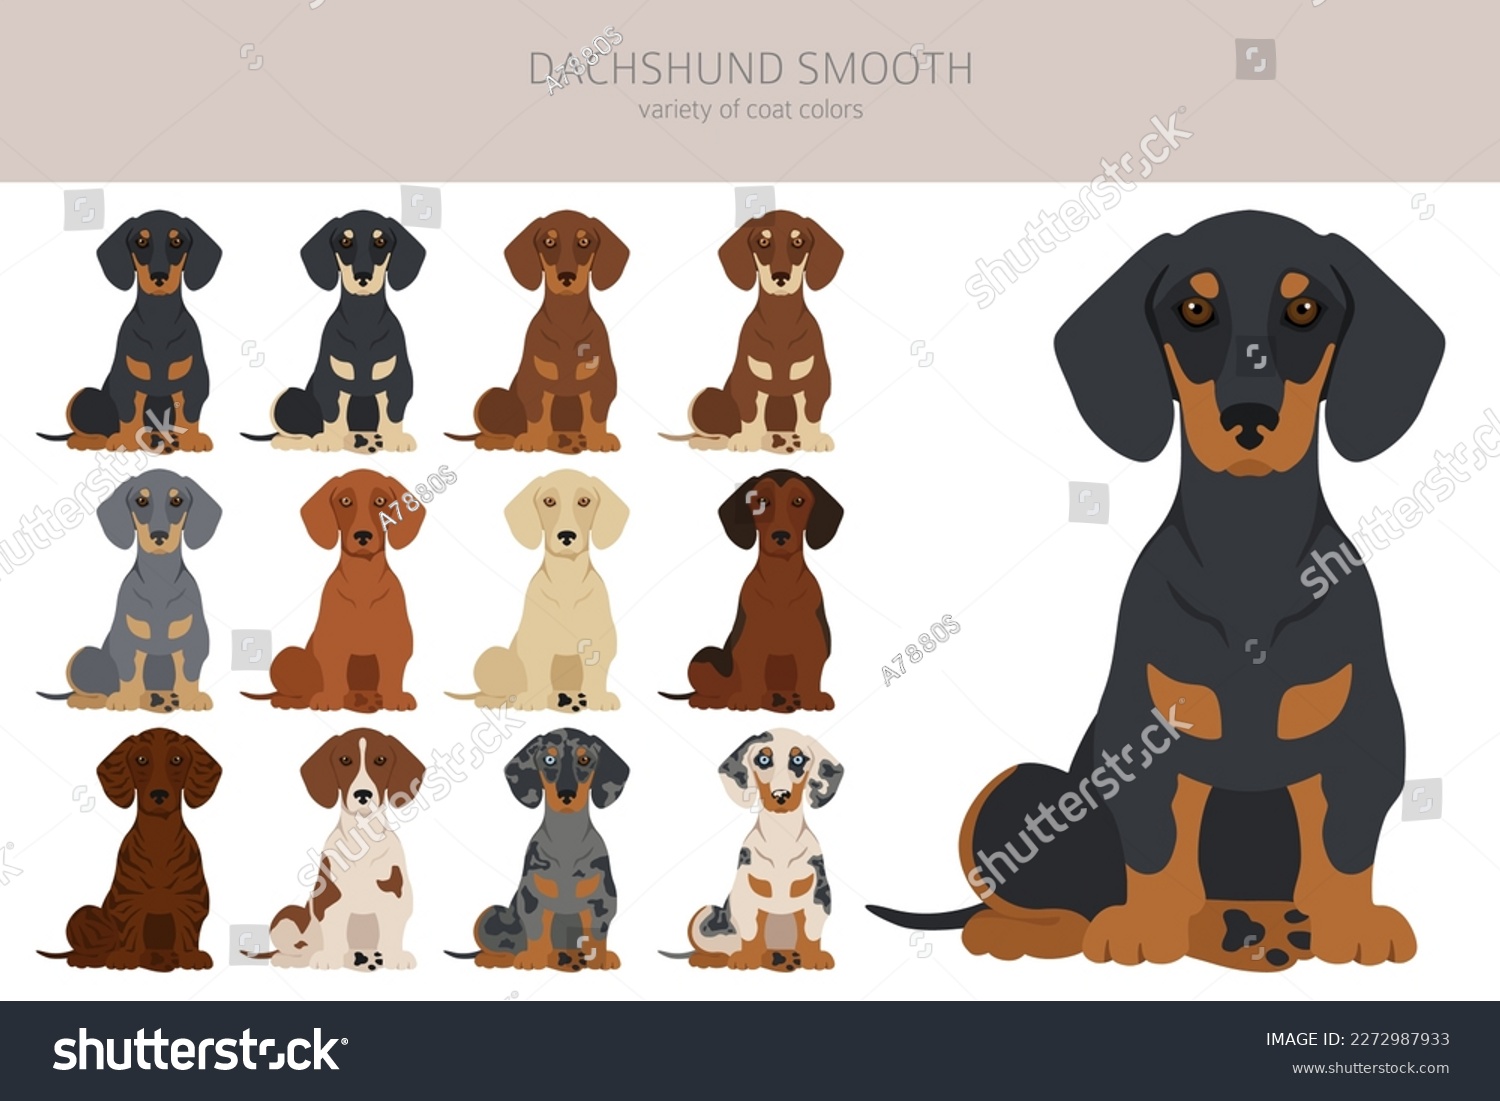 SVG of Dachshund short haired clipart. Different poses, coat colors set.  Vector illustration svg